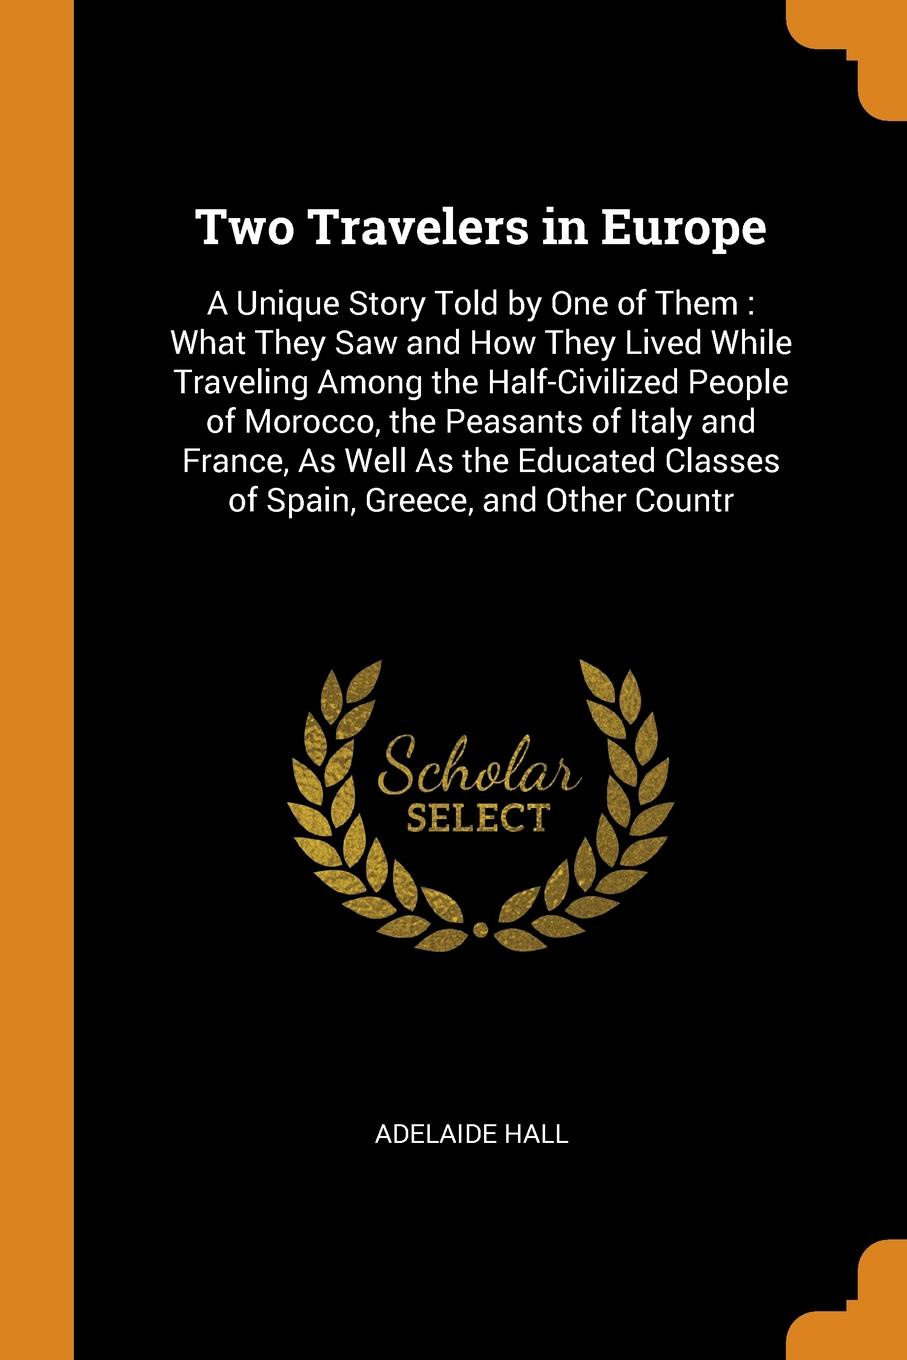 Two Travelers in Europe. A Unique Story Told by One of Them : What They Saw and How They Lived While Traveling Among the Half-Civilized People of Morocco, the Peasants of Italy and France, As Well As the Educated Classes of Spain, Greece, and Othe...